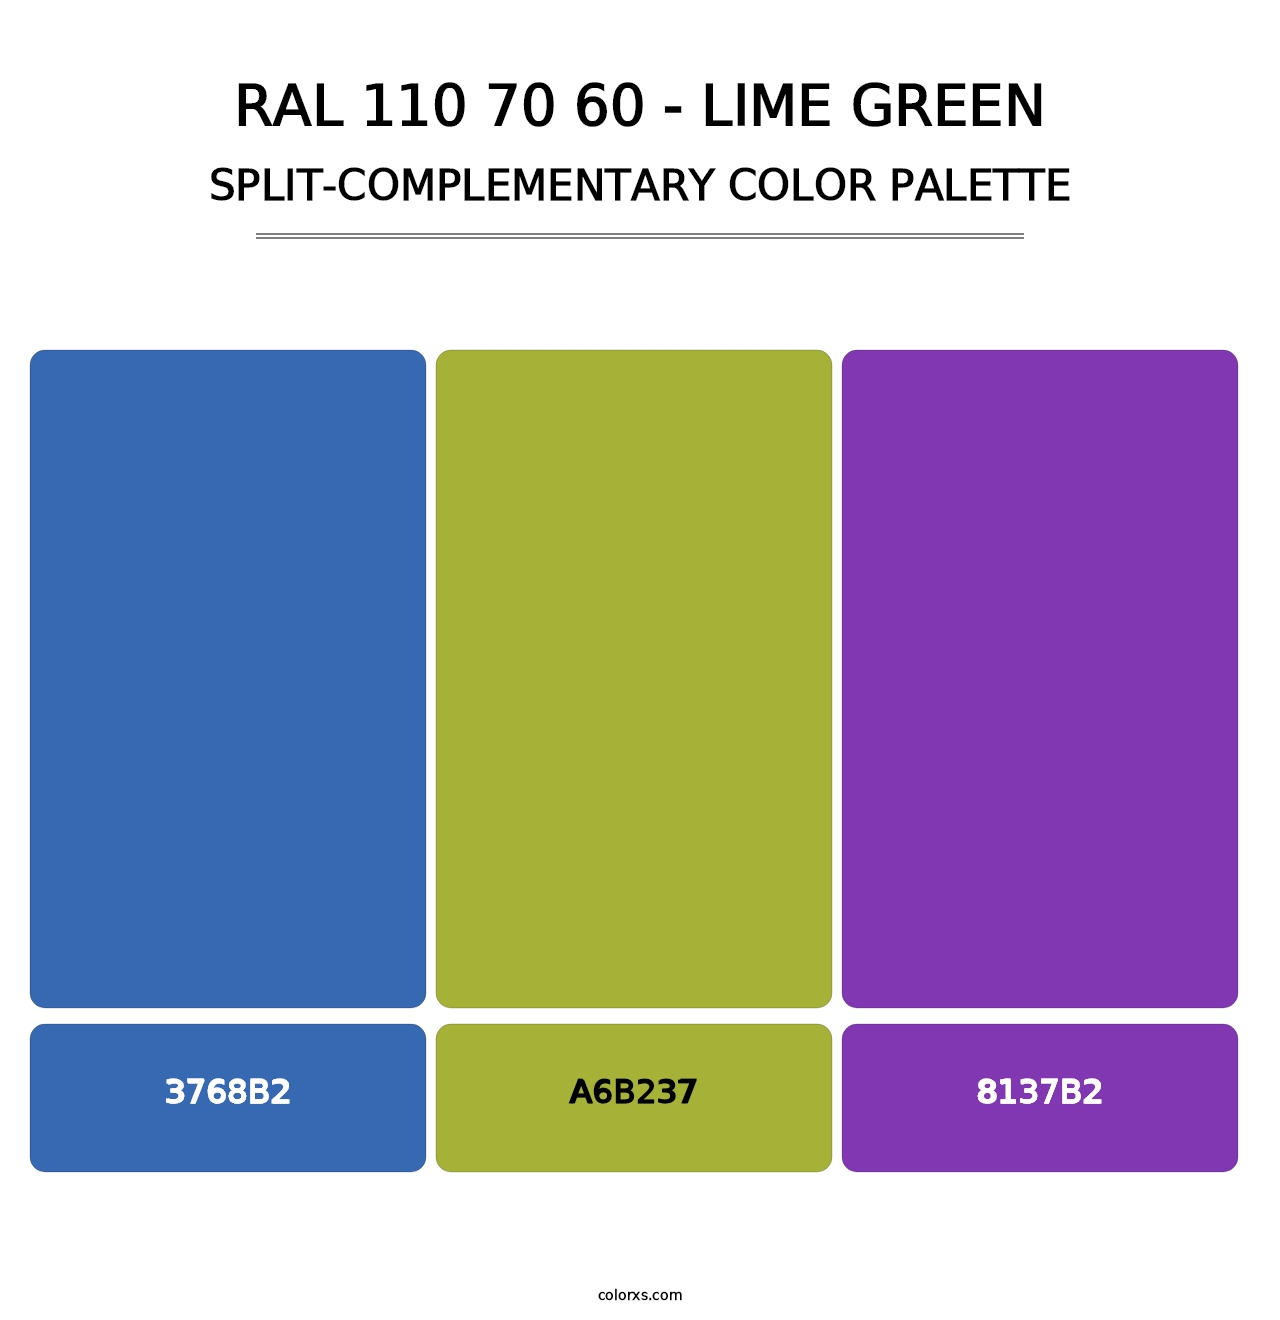 RAL 110 70 60 - Lime Green - Split-Complementary Color Palette